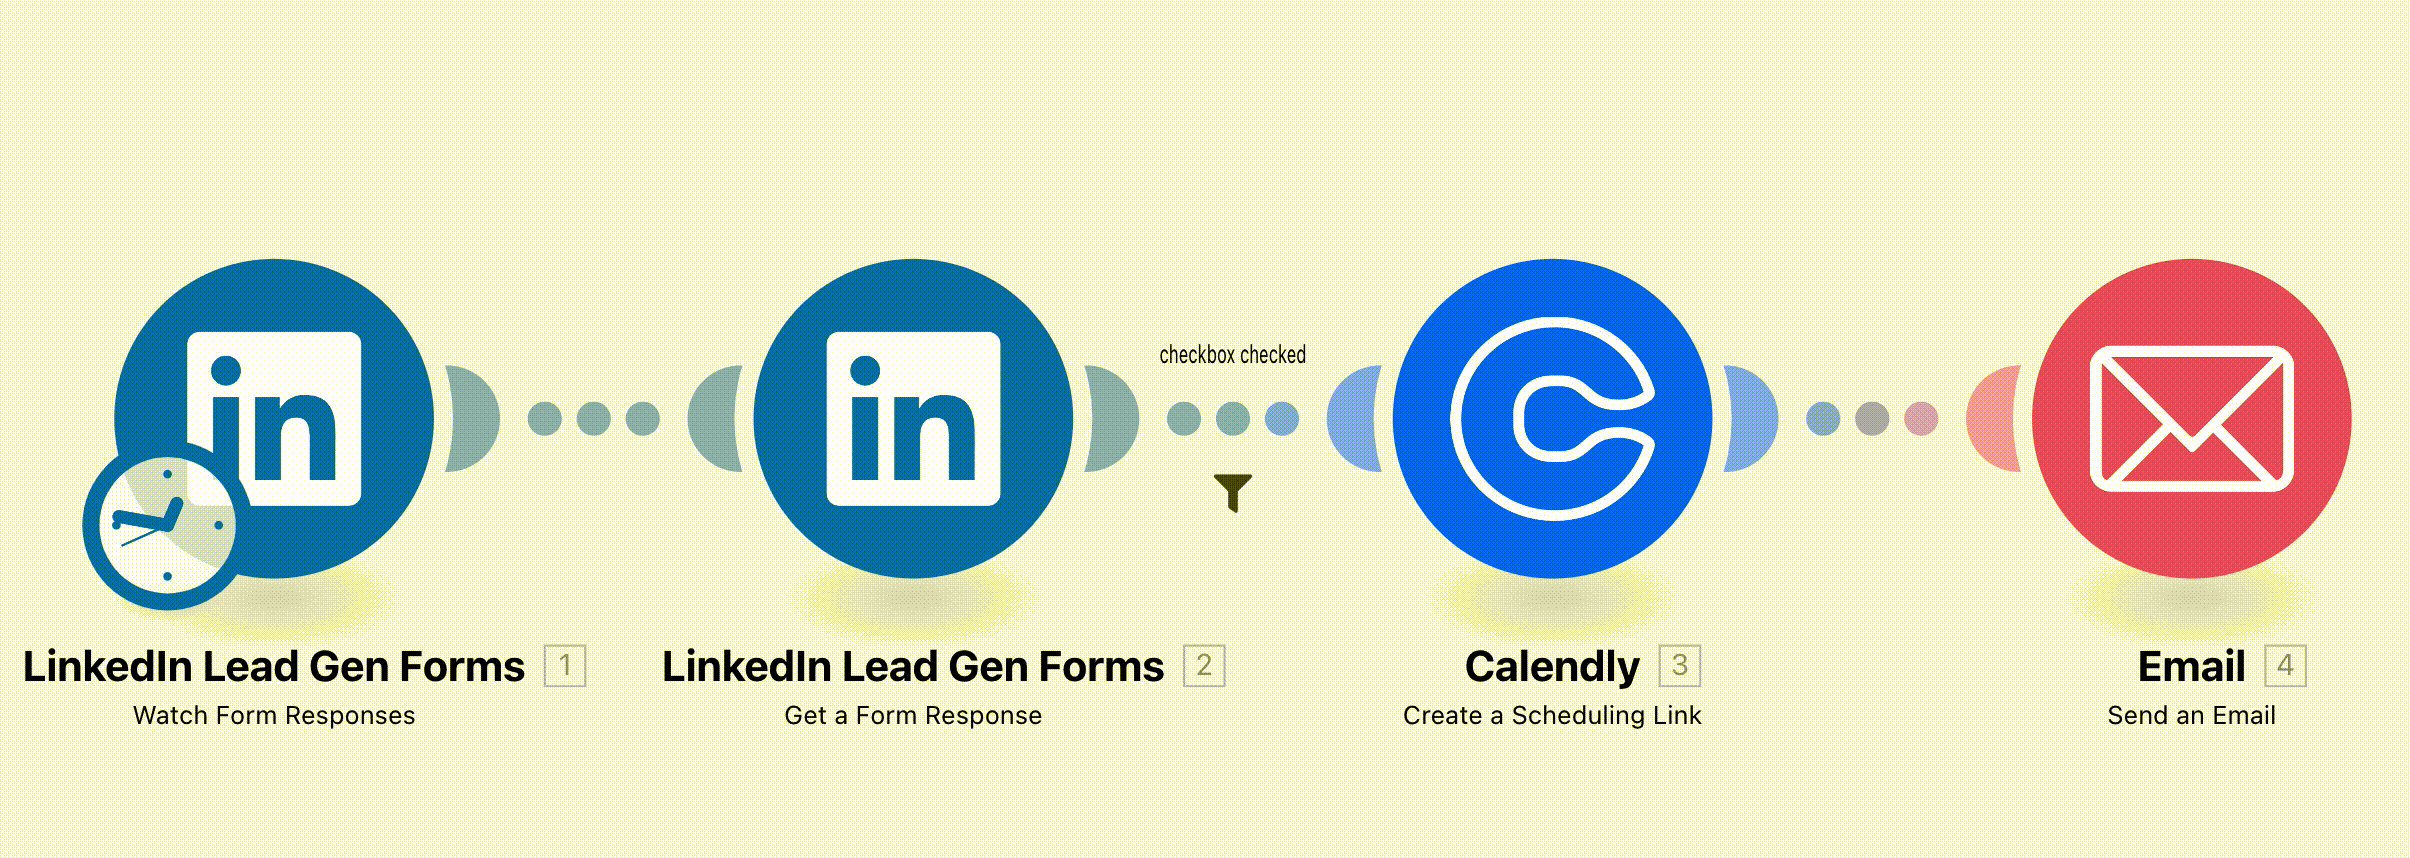 Send Calendly scheduling links to new LinkedIn Lead Gen Forms leads with Make’s ready-to-use template.